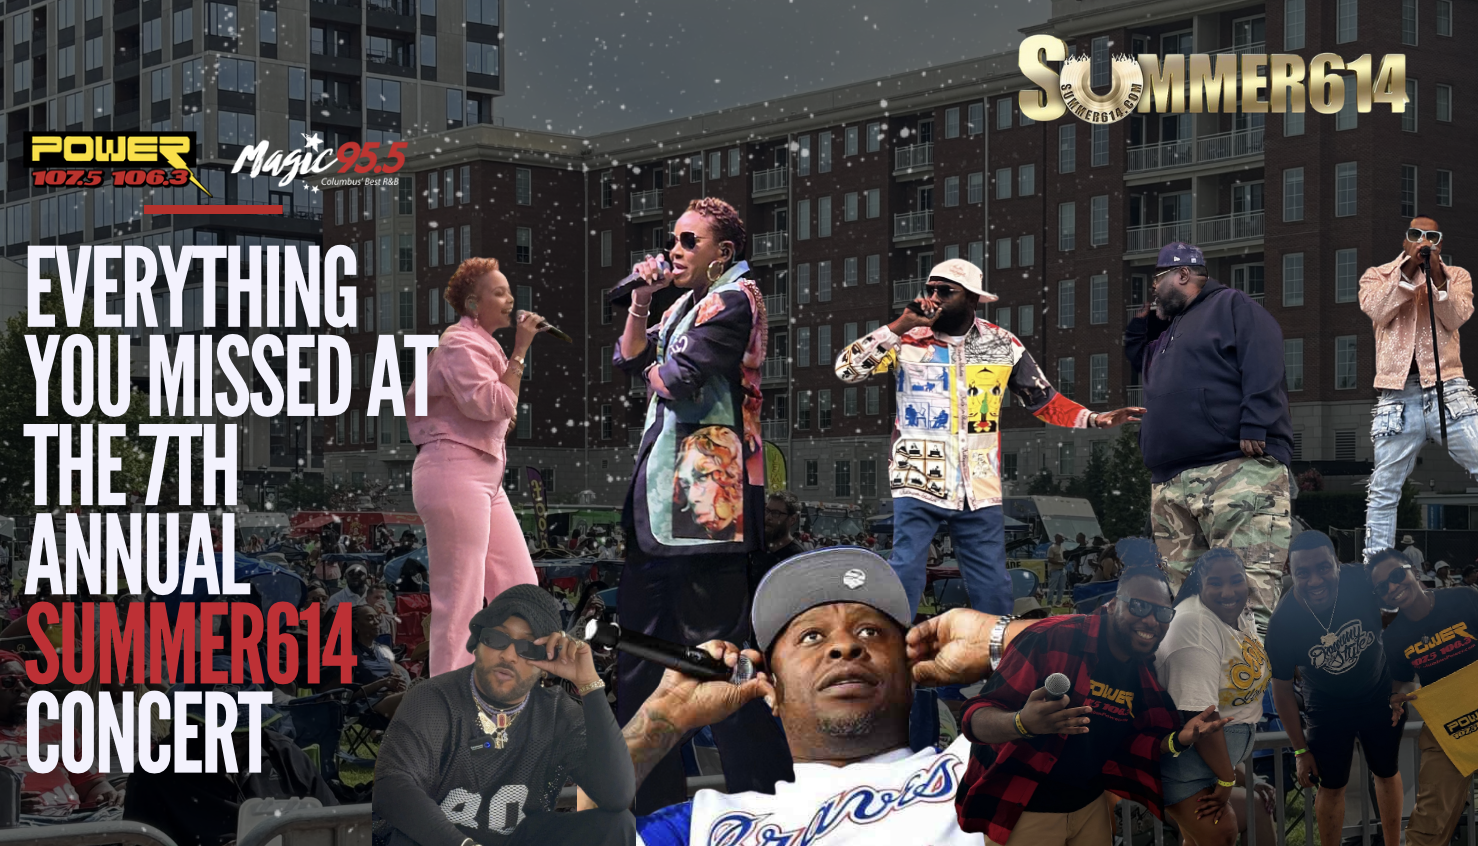 THE 7TH ANNUAL SUMMER614 CONCERT COVER